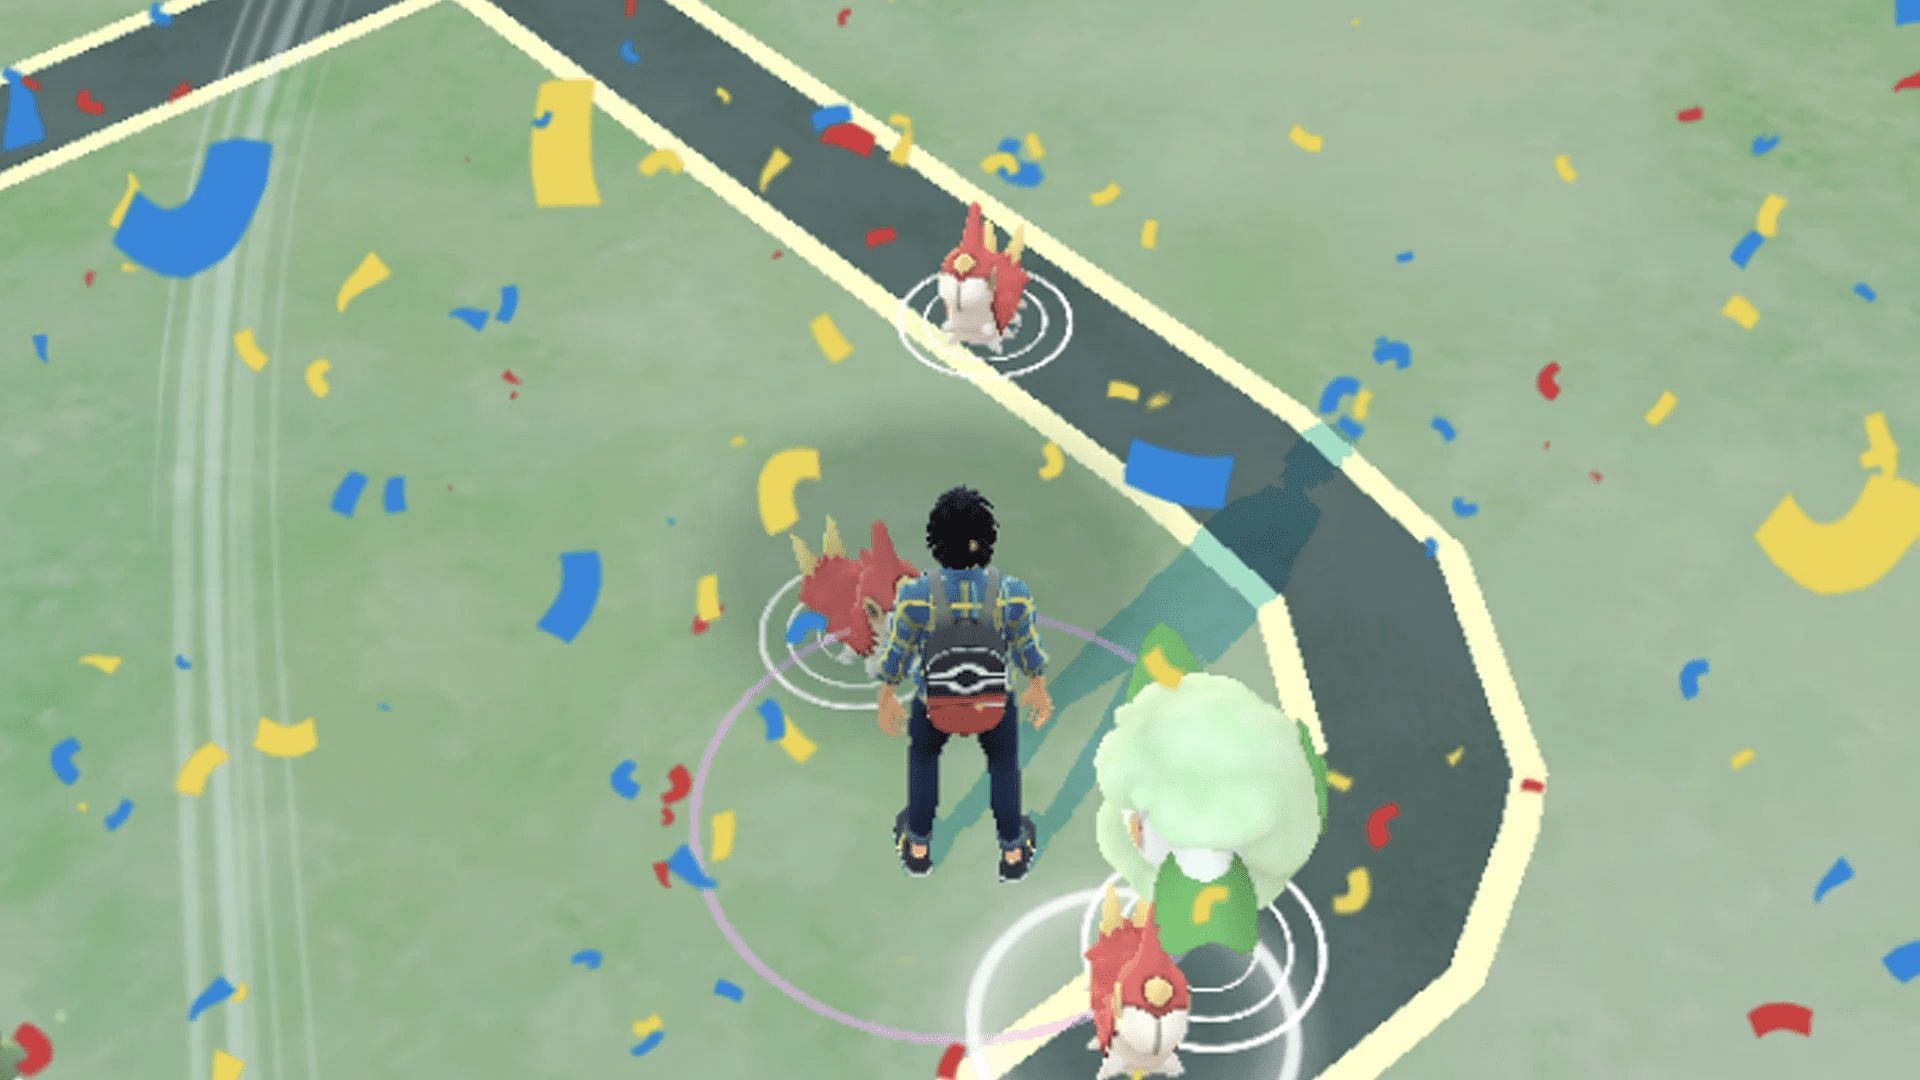 Why was confetti falling recently in Pokemon GO?